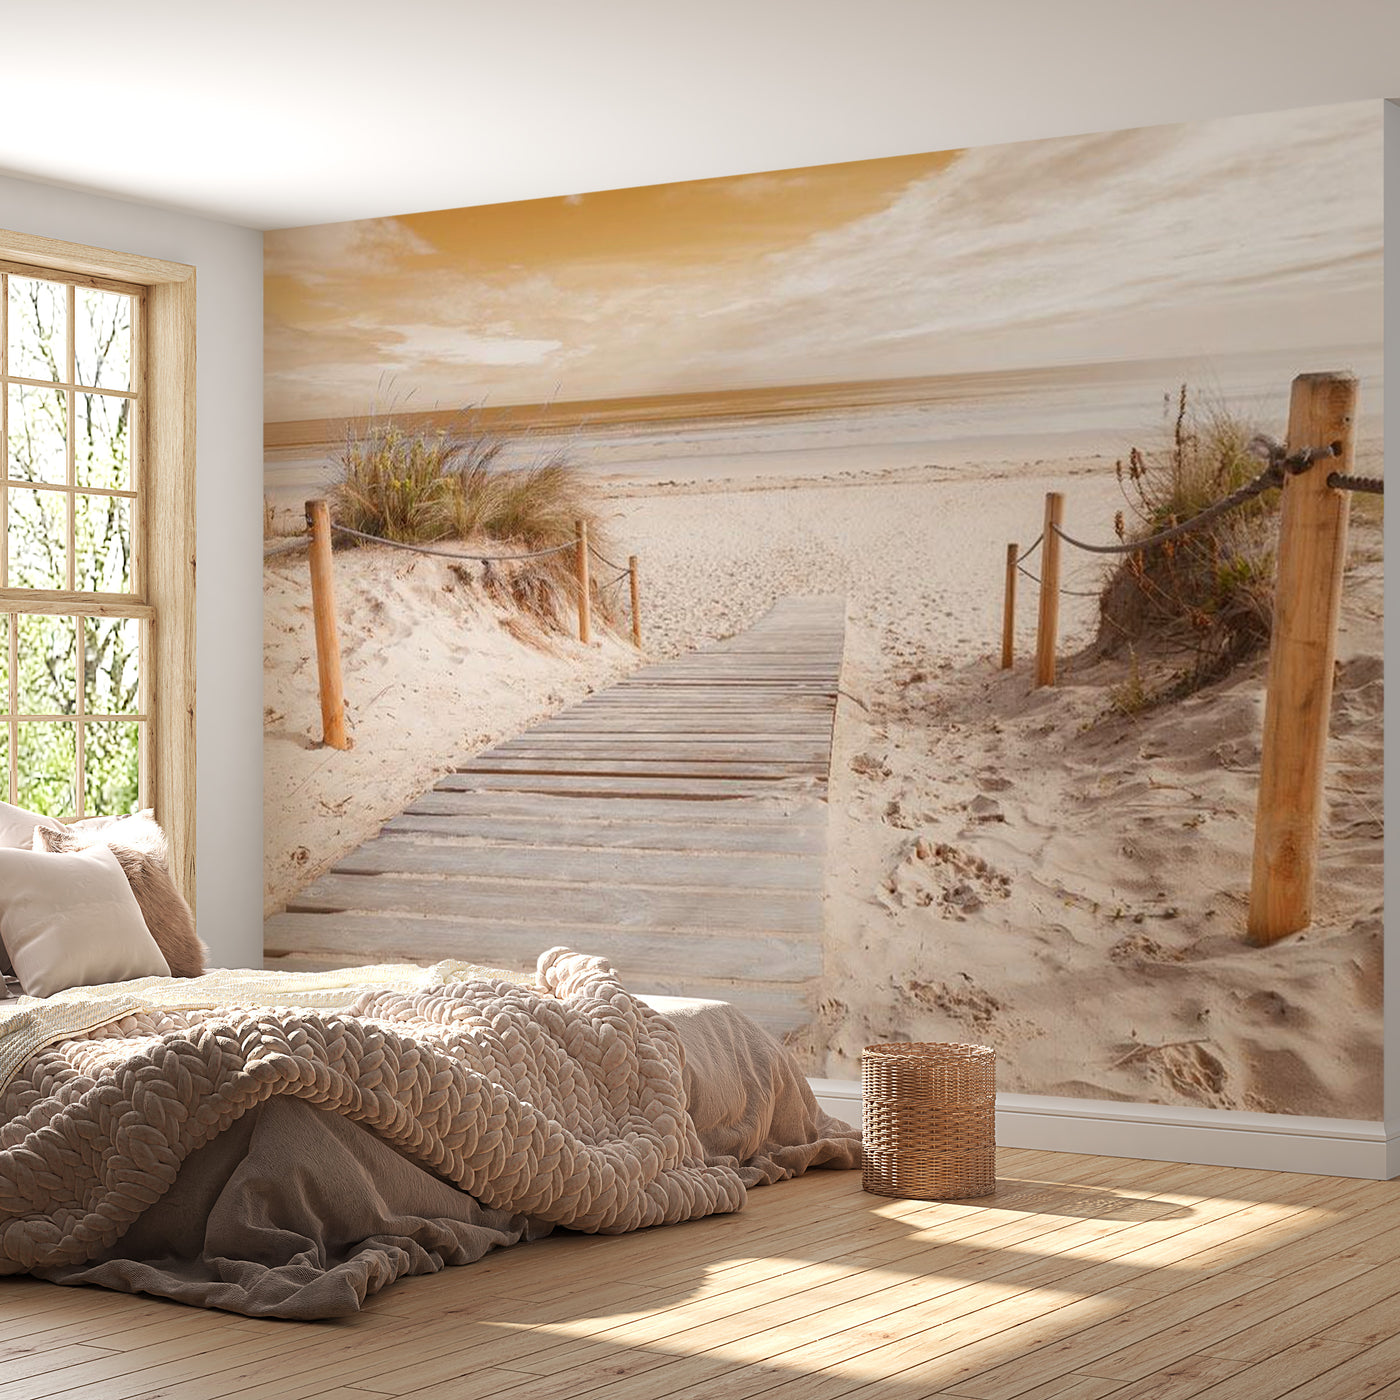 Peel & Stick Beach Wall Mural - On The Beach Sepia - Removable Wall Decals